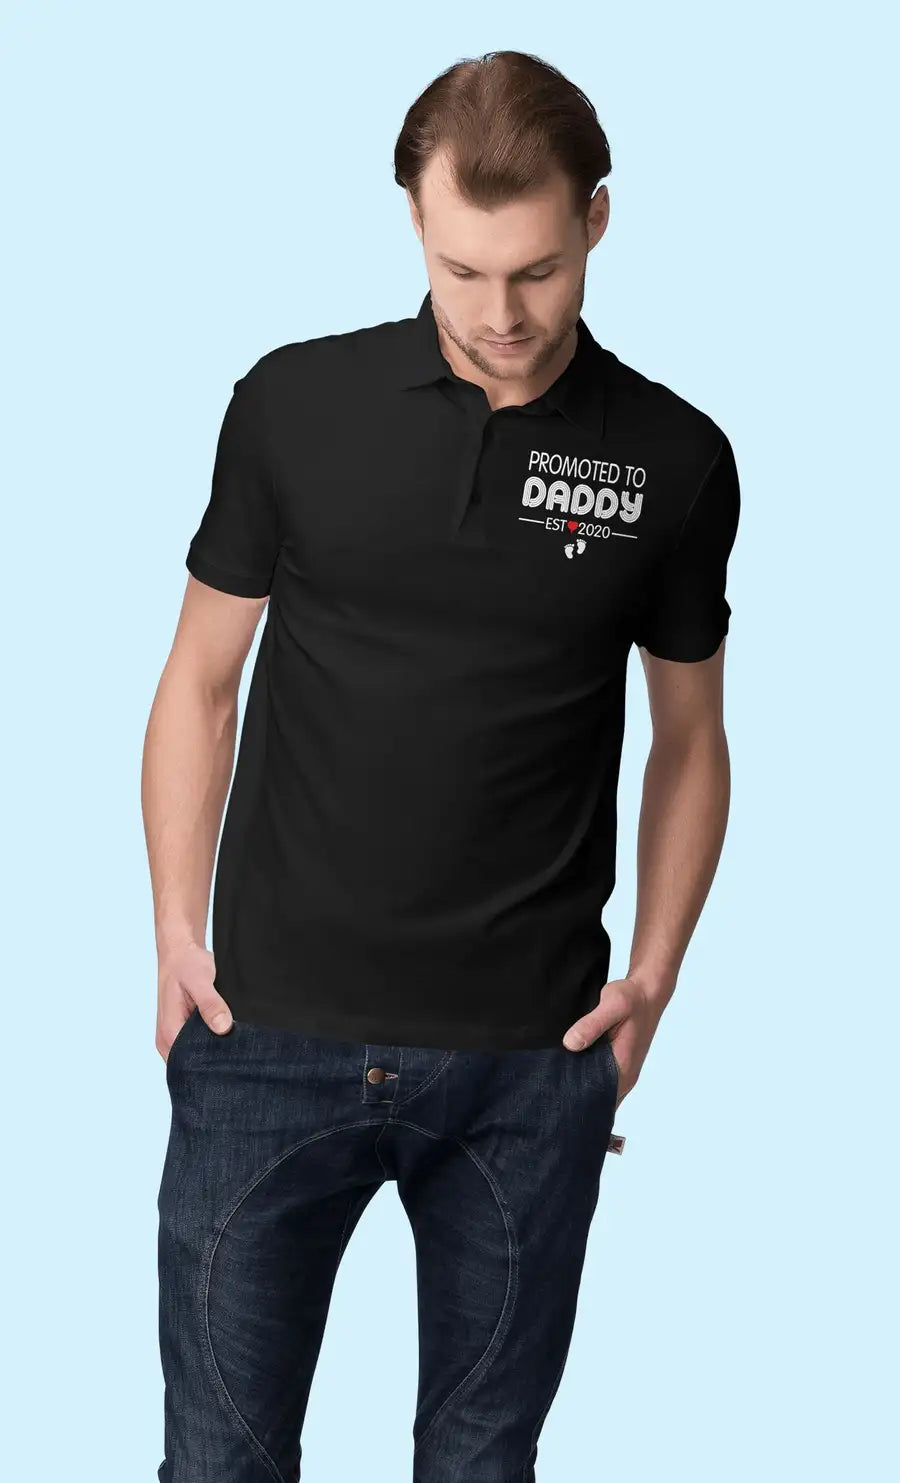 Promoted to Daddy Polo T Shirt for Men | Premium Design | Catch My Drift India - Catch My Drift India  black, clothing, dad, made in india, parents, polo, shirt, t shirt, tshirt